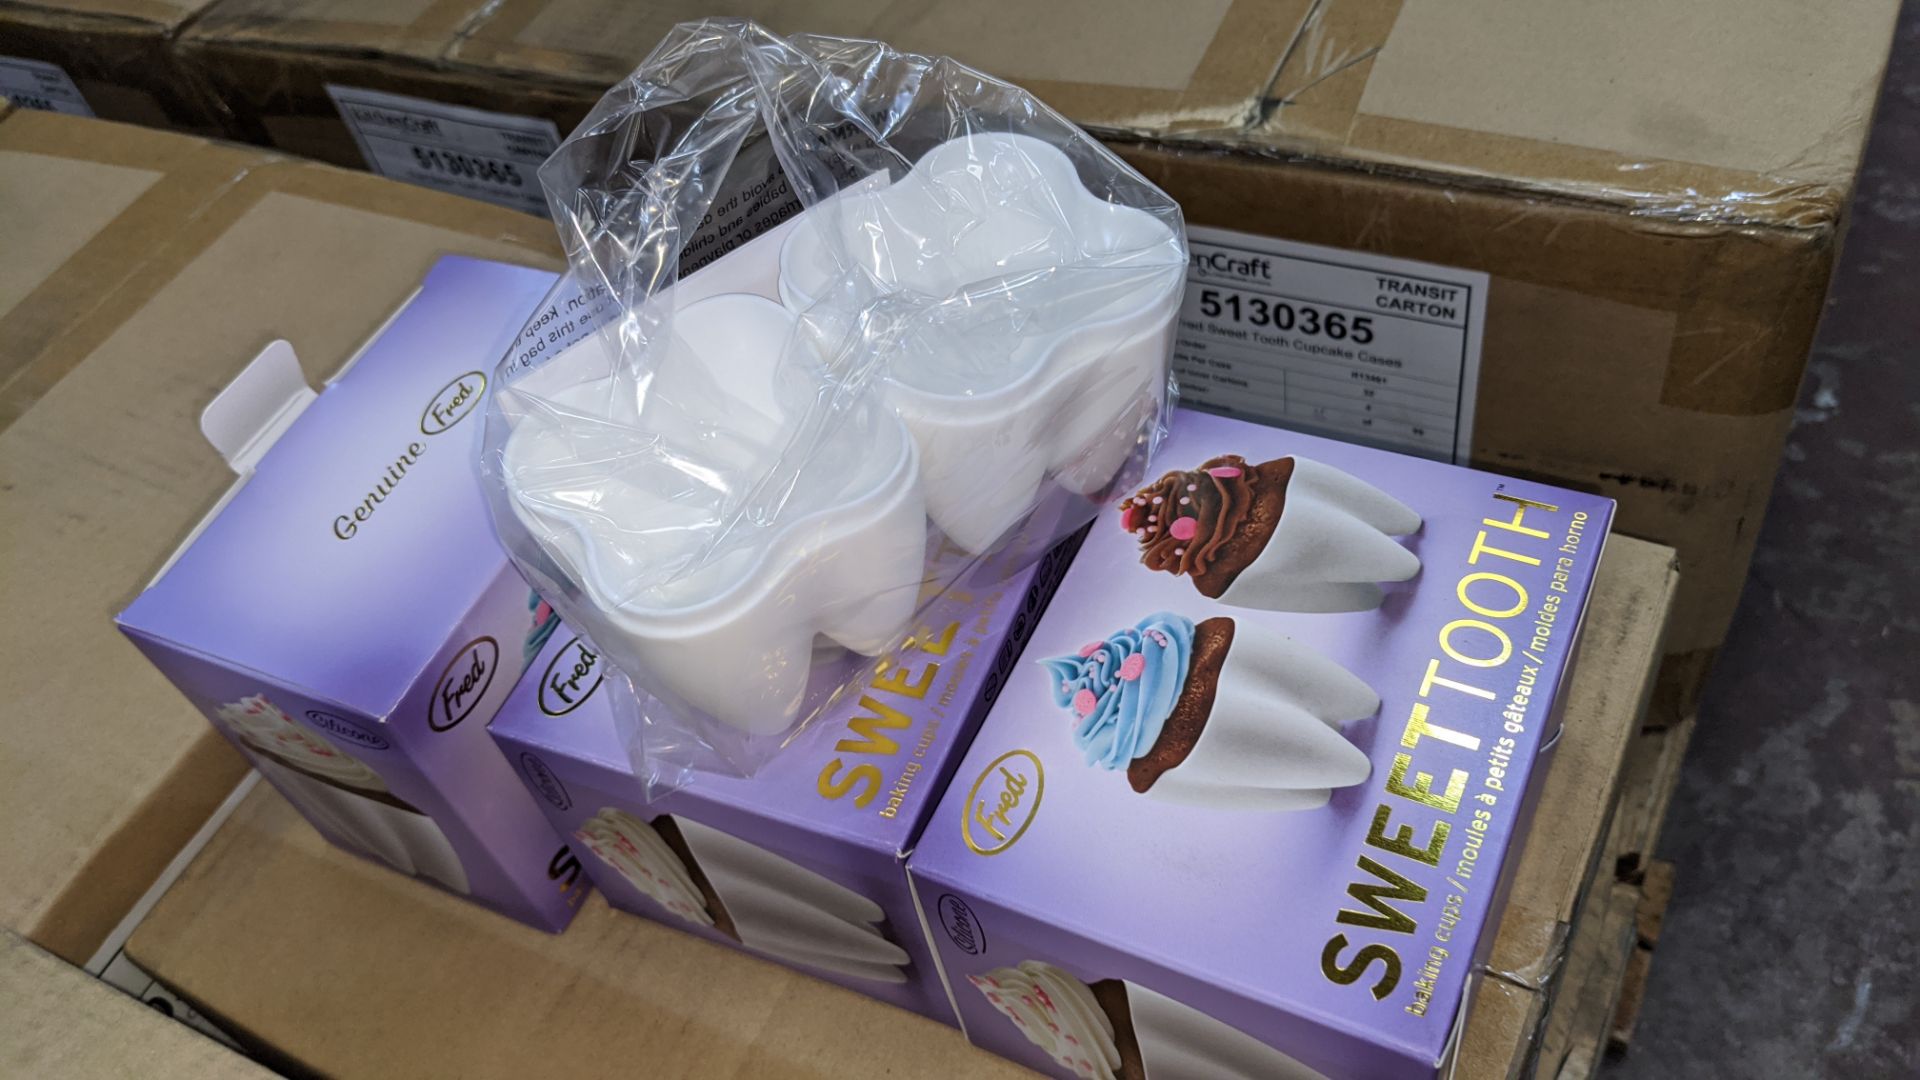 96 off Genuine Fred sweettooth baking cup sets, each set comprising 4 silicone toothy cupcake moulds - Image 4 of 4